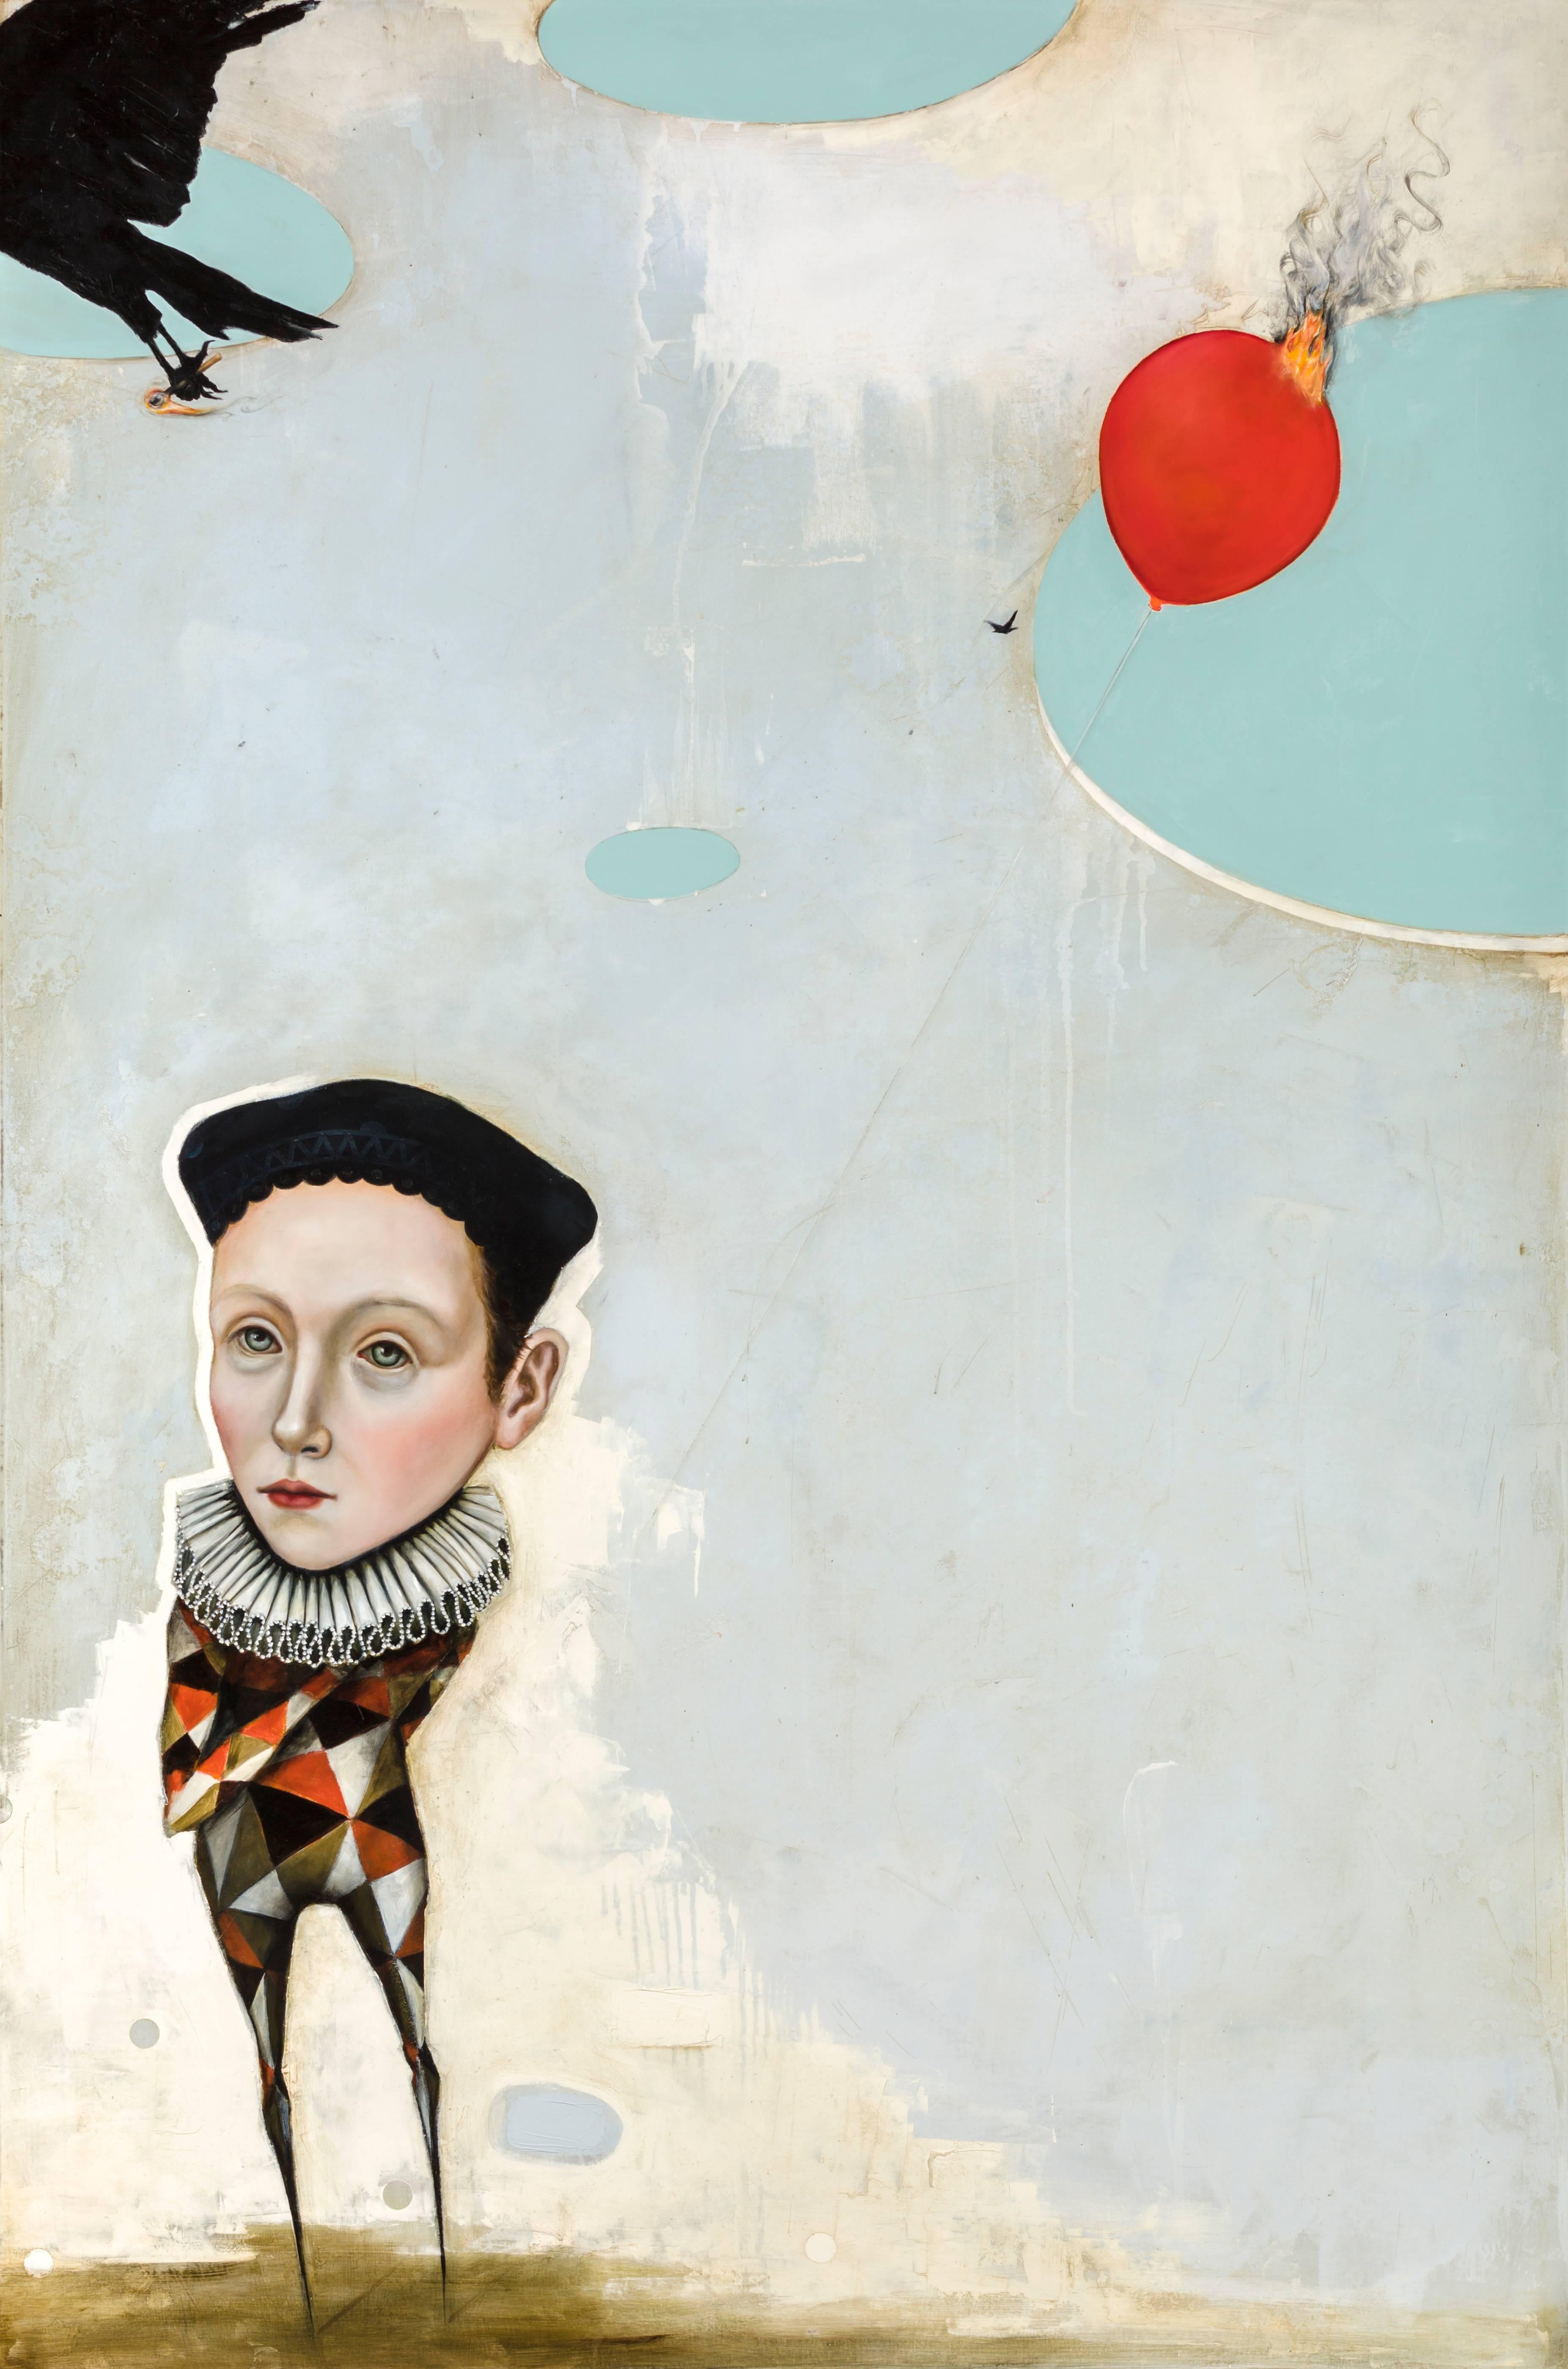 The Last Balloon, oil on canvas, pop-surrealism figurative painting, w harlequin - Painting by Michele Mikesell